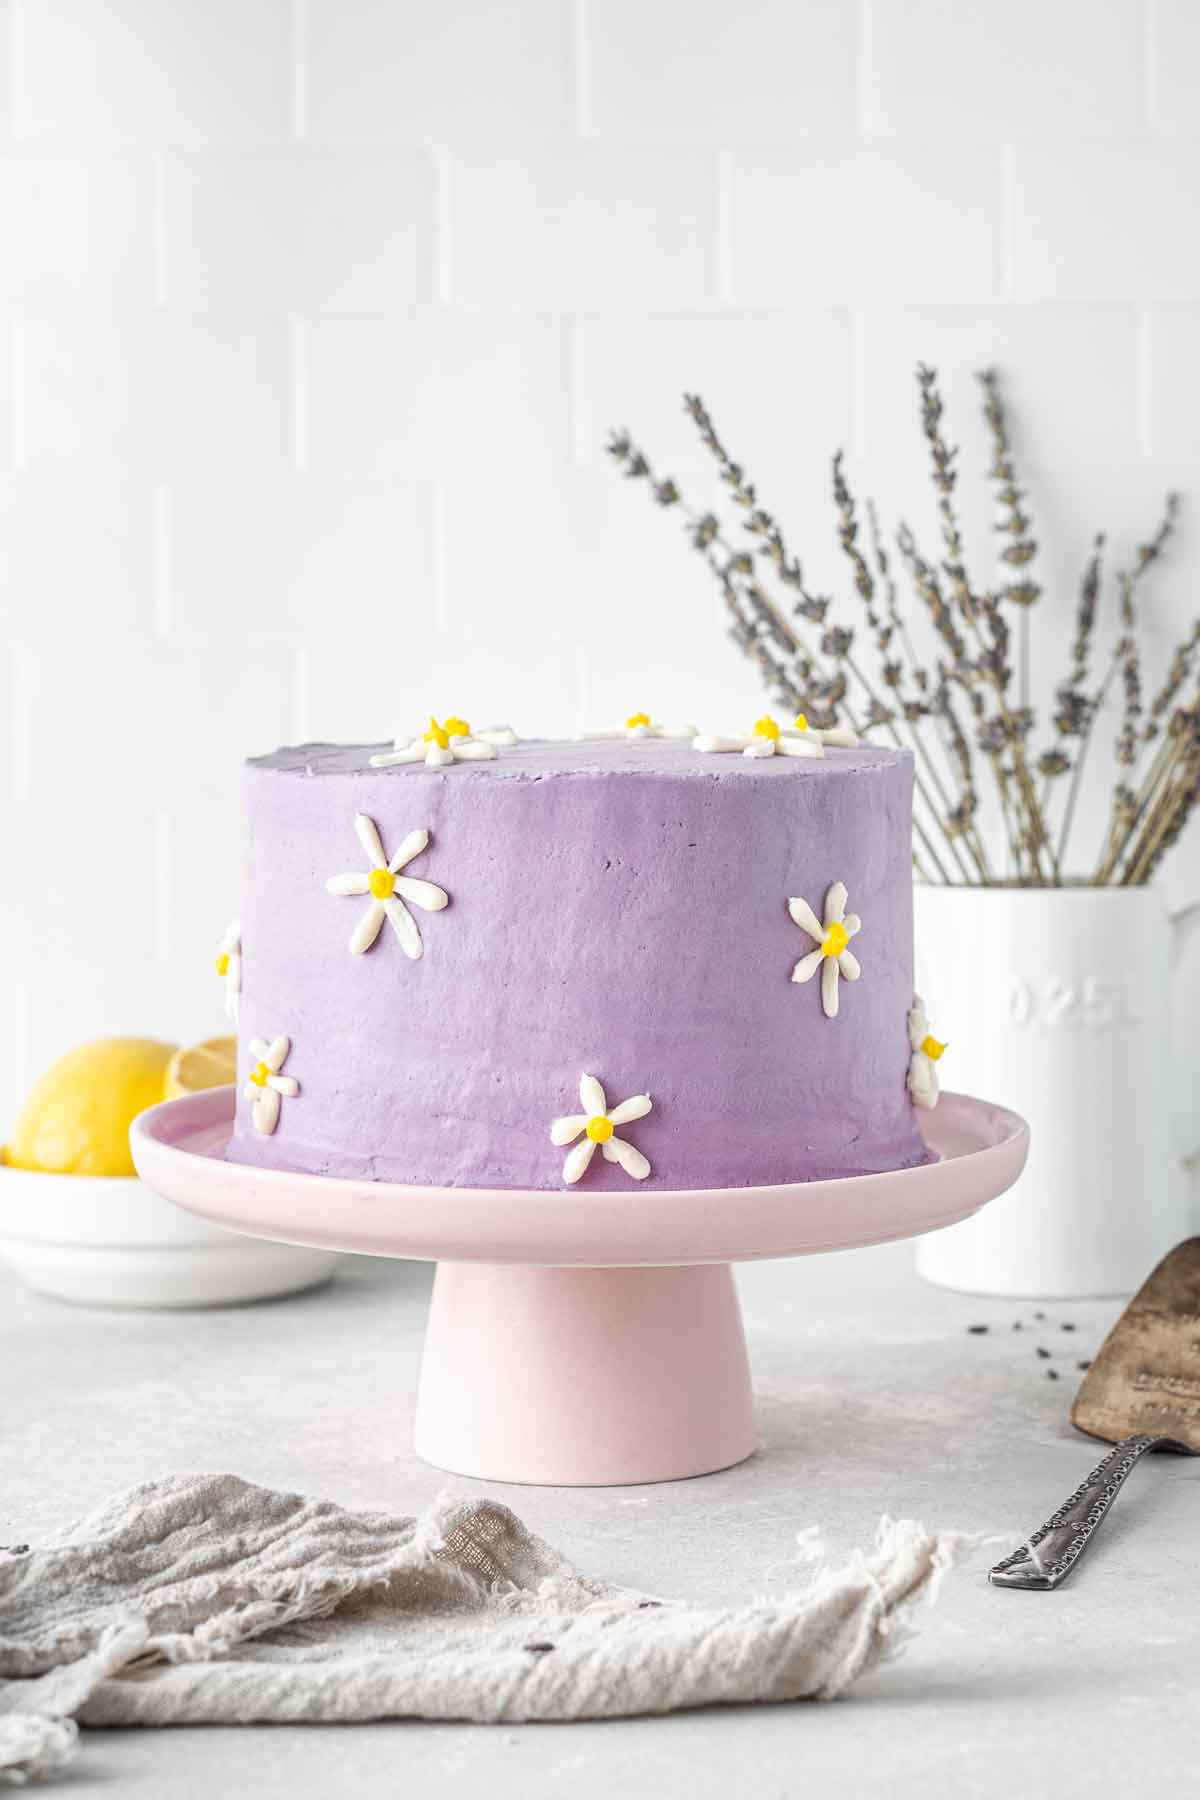 Decorated daisy cake on a cake stand.